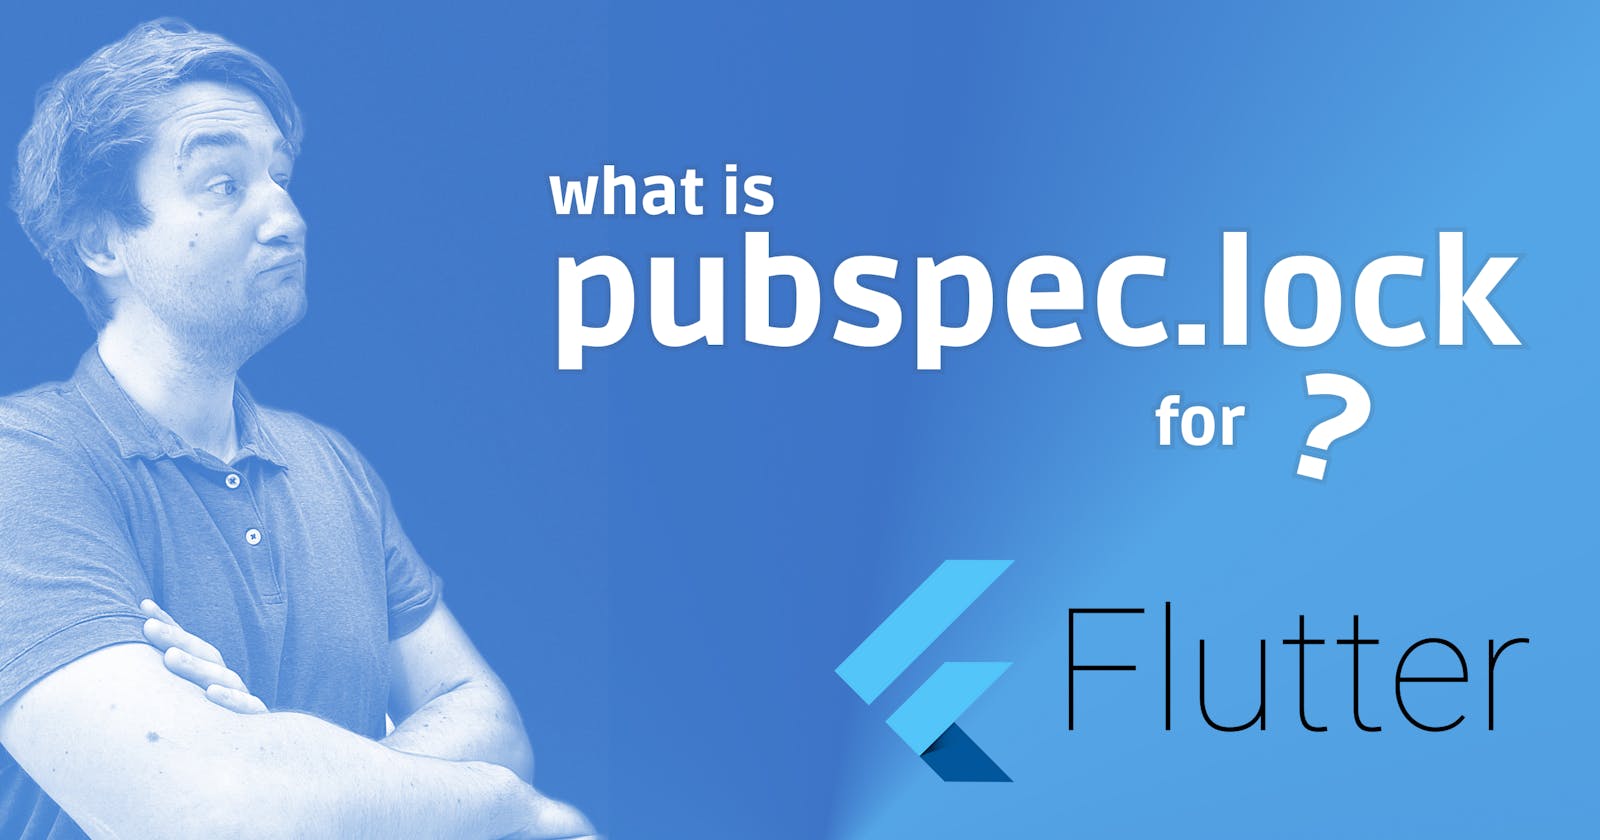 What is pubspec.lock for